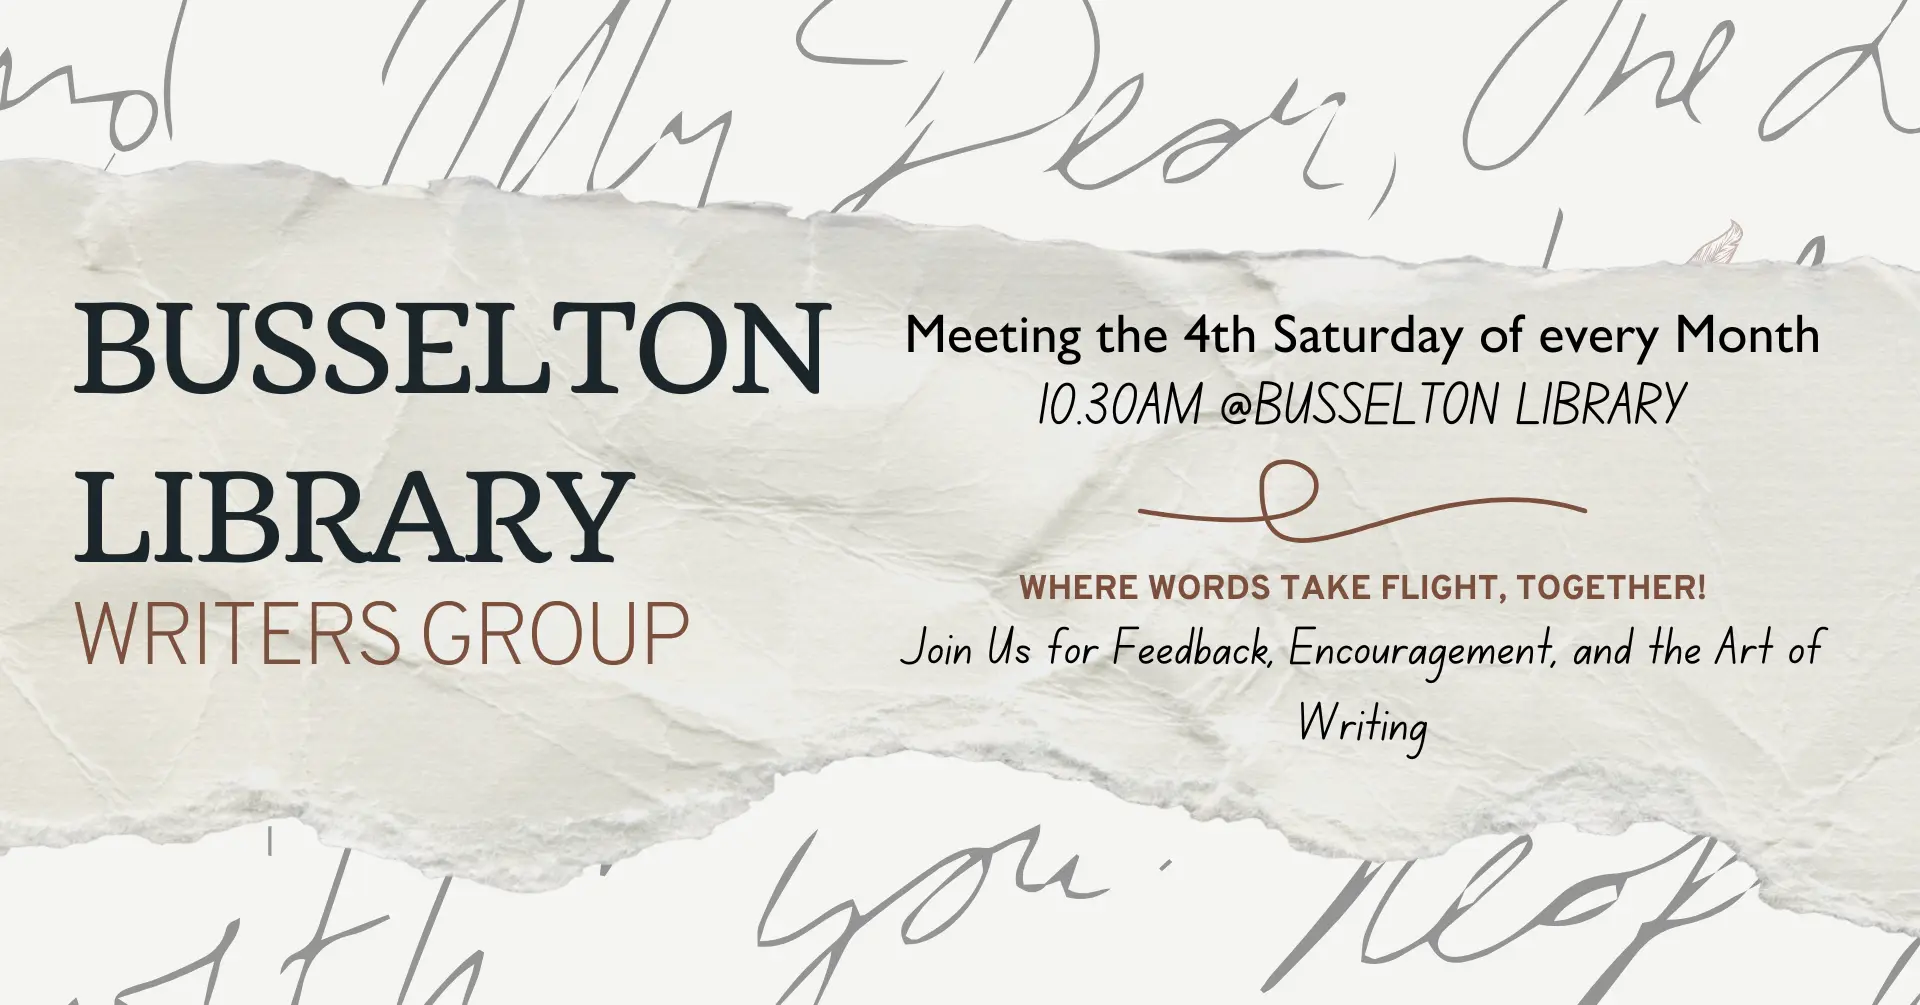 Busselton Library's writers group will meet the fourth Saturday of every month, with it's first meeting being on the 22nd of June